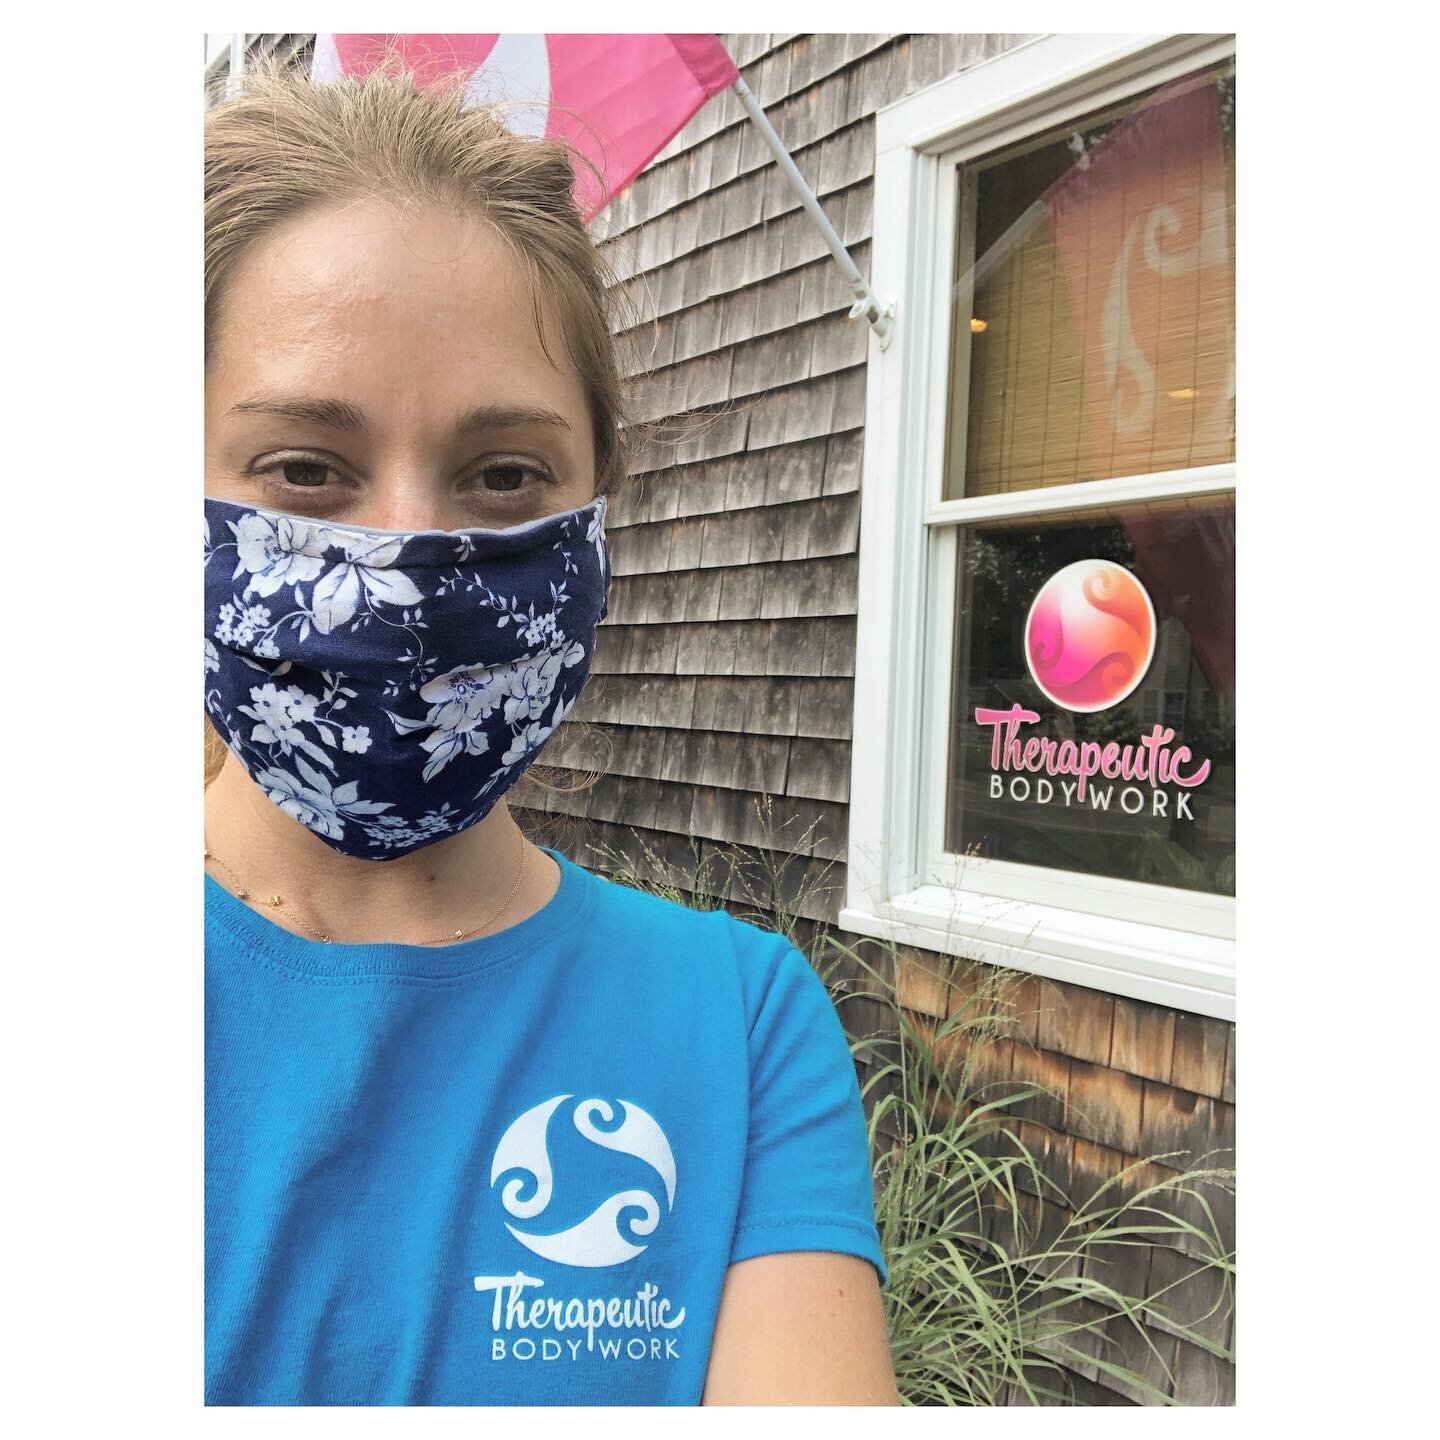 Big smile underneath this mask! 
.
I had my first day at @therapeuticbodywork, my dream job since I decided I wanted to become a massage therapist. Beth and her team are the best around, and I&rsquo;m so lucky to learn and collaborate with them all👐